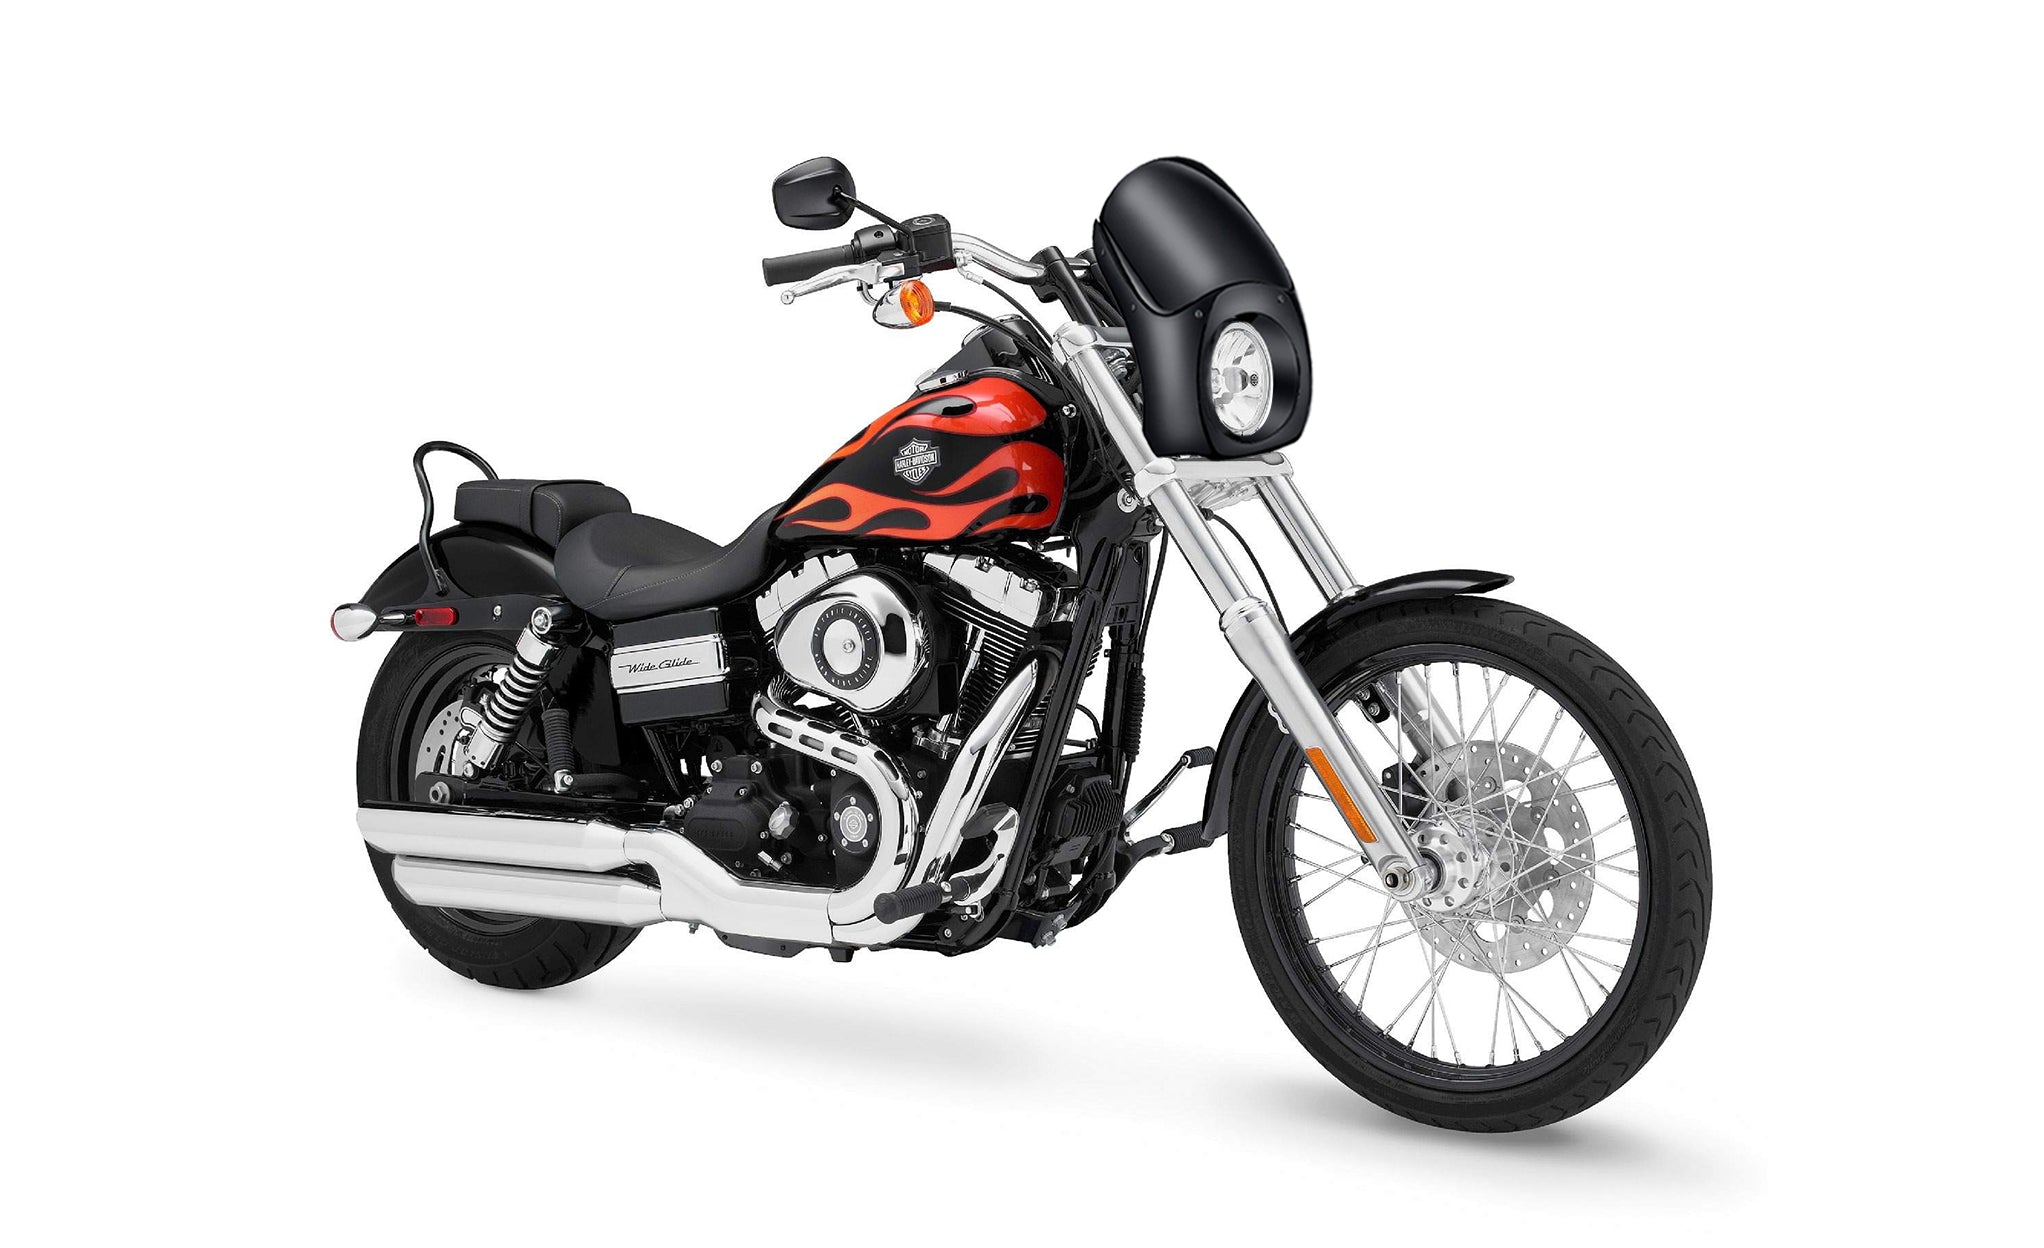 Viking Bronco Motorcycle Fairing For Harley Dyna Wide Glide FXDWG Gloss Black Bag on Bike View @expand